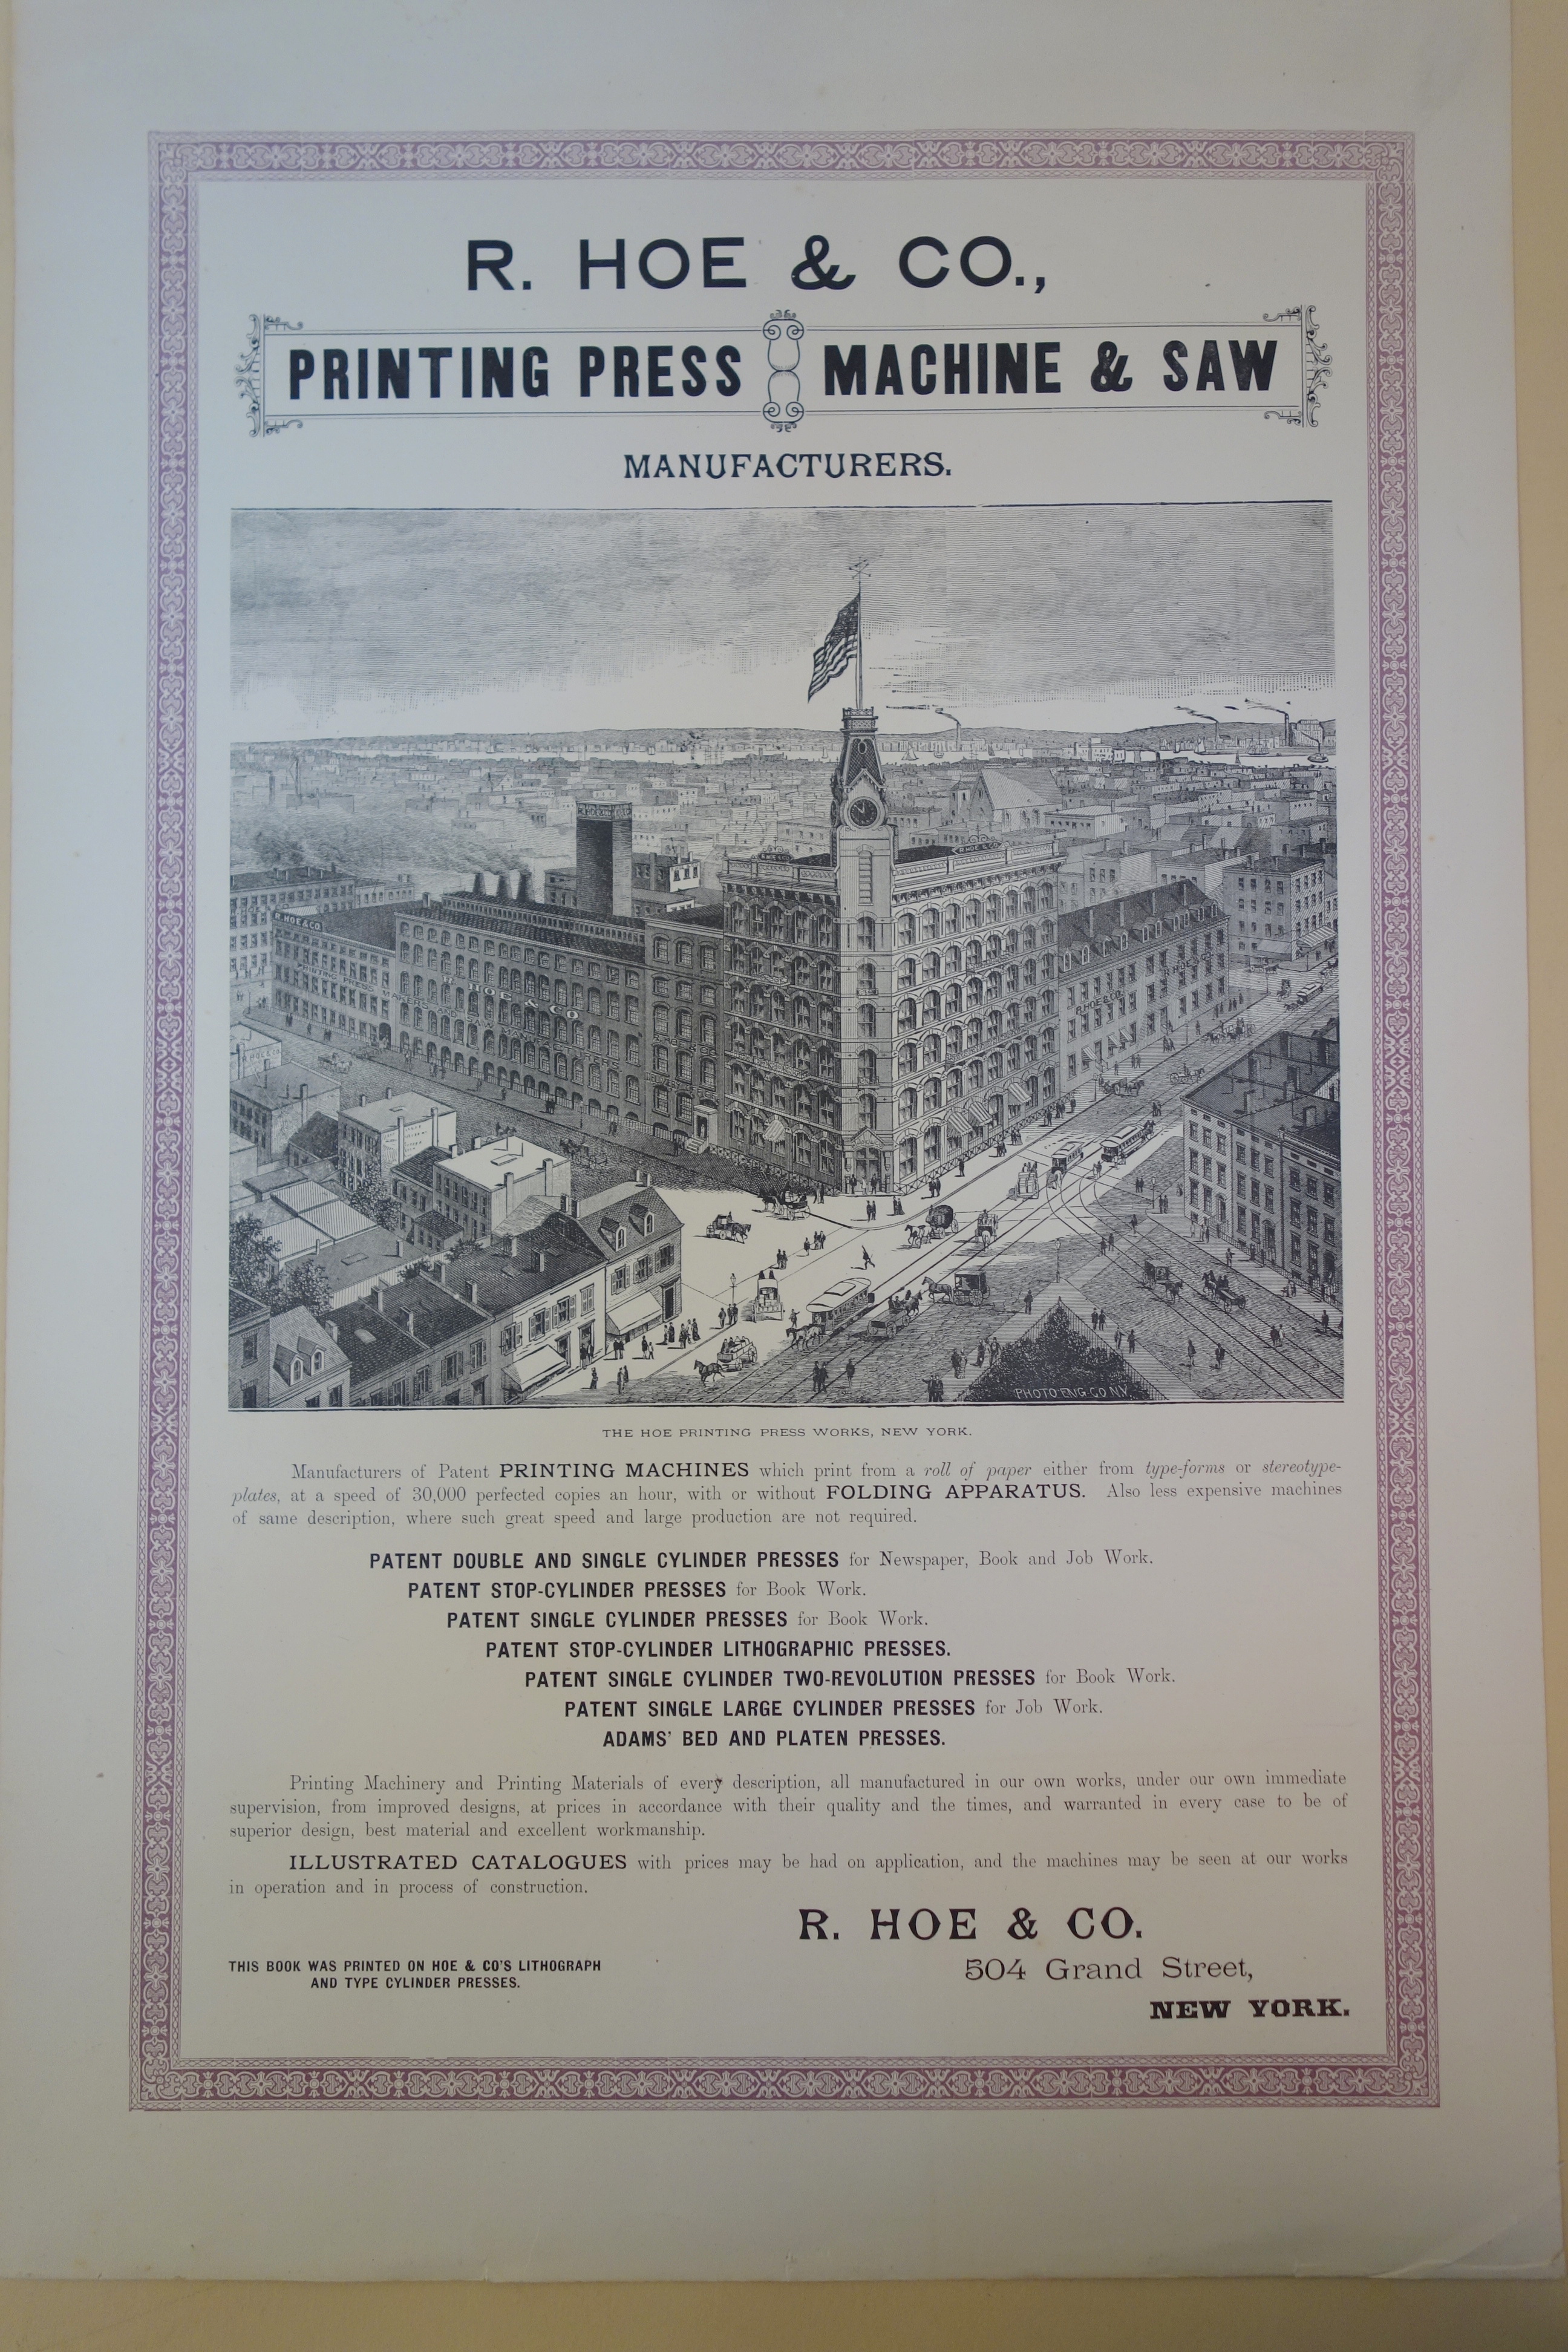 A poster describing the products manufactured by Robert Hoe